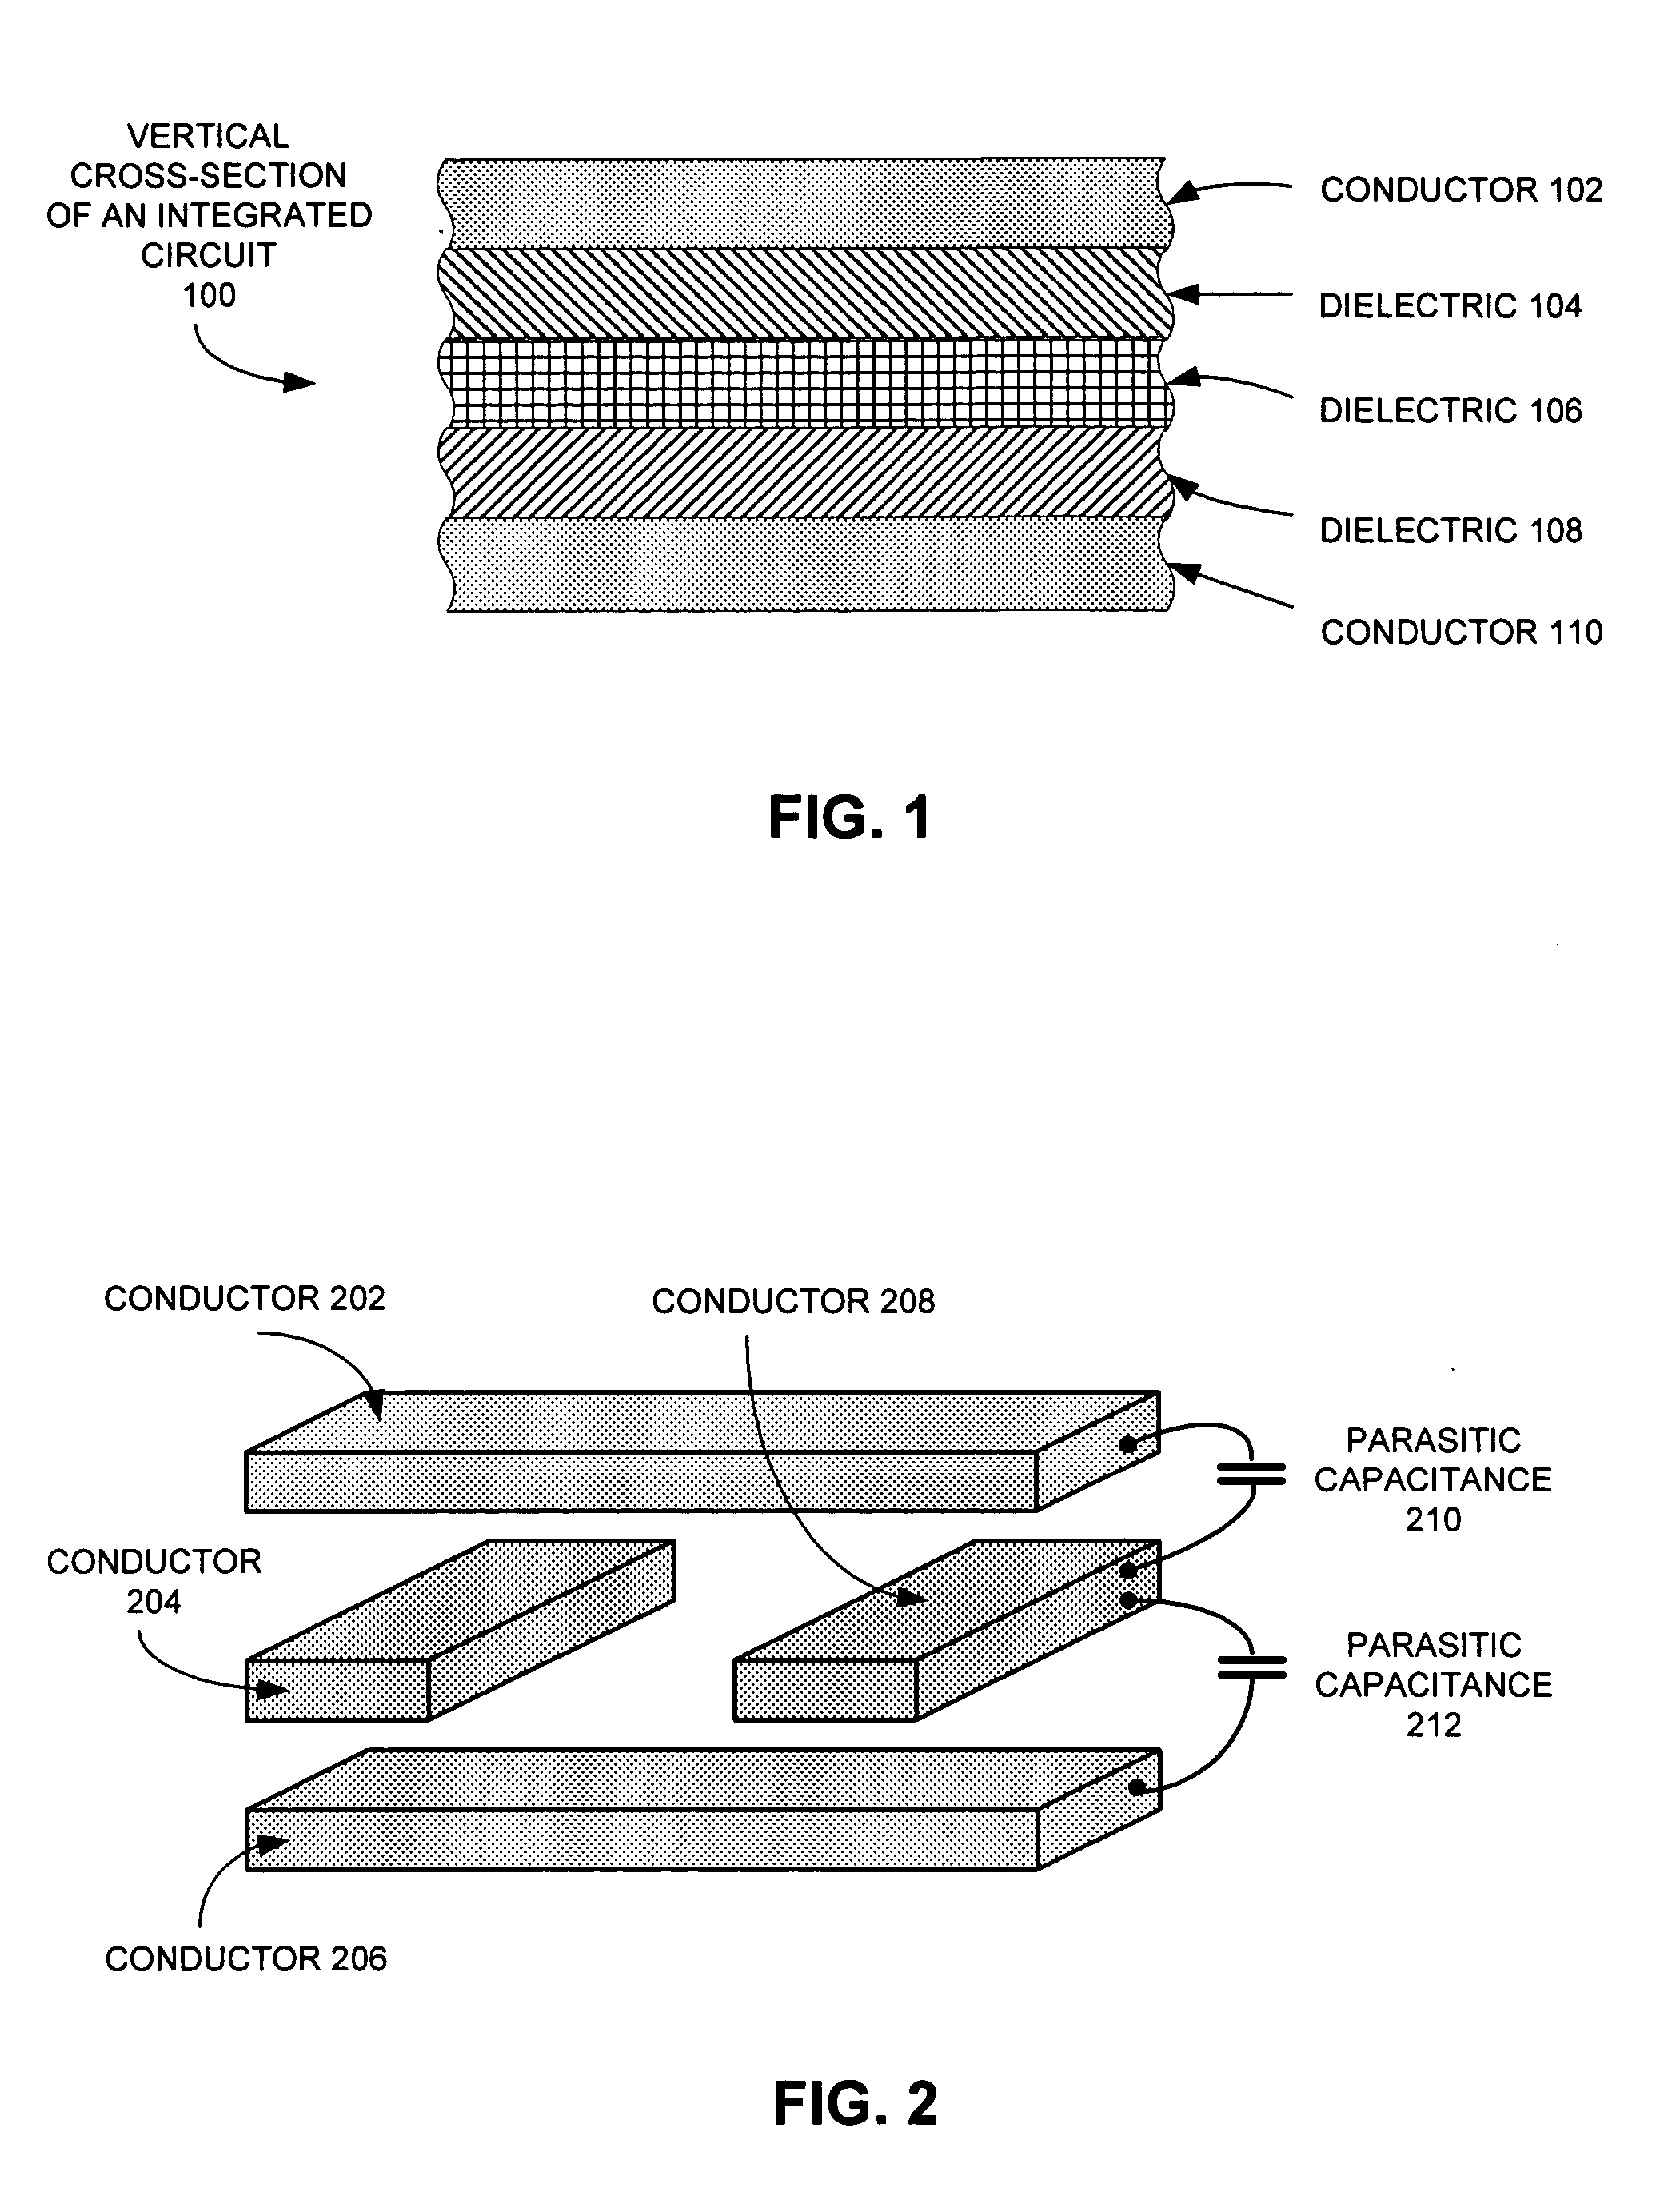 Method and apparatus for estimating parasitic capacitance